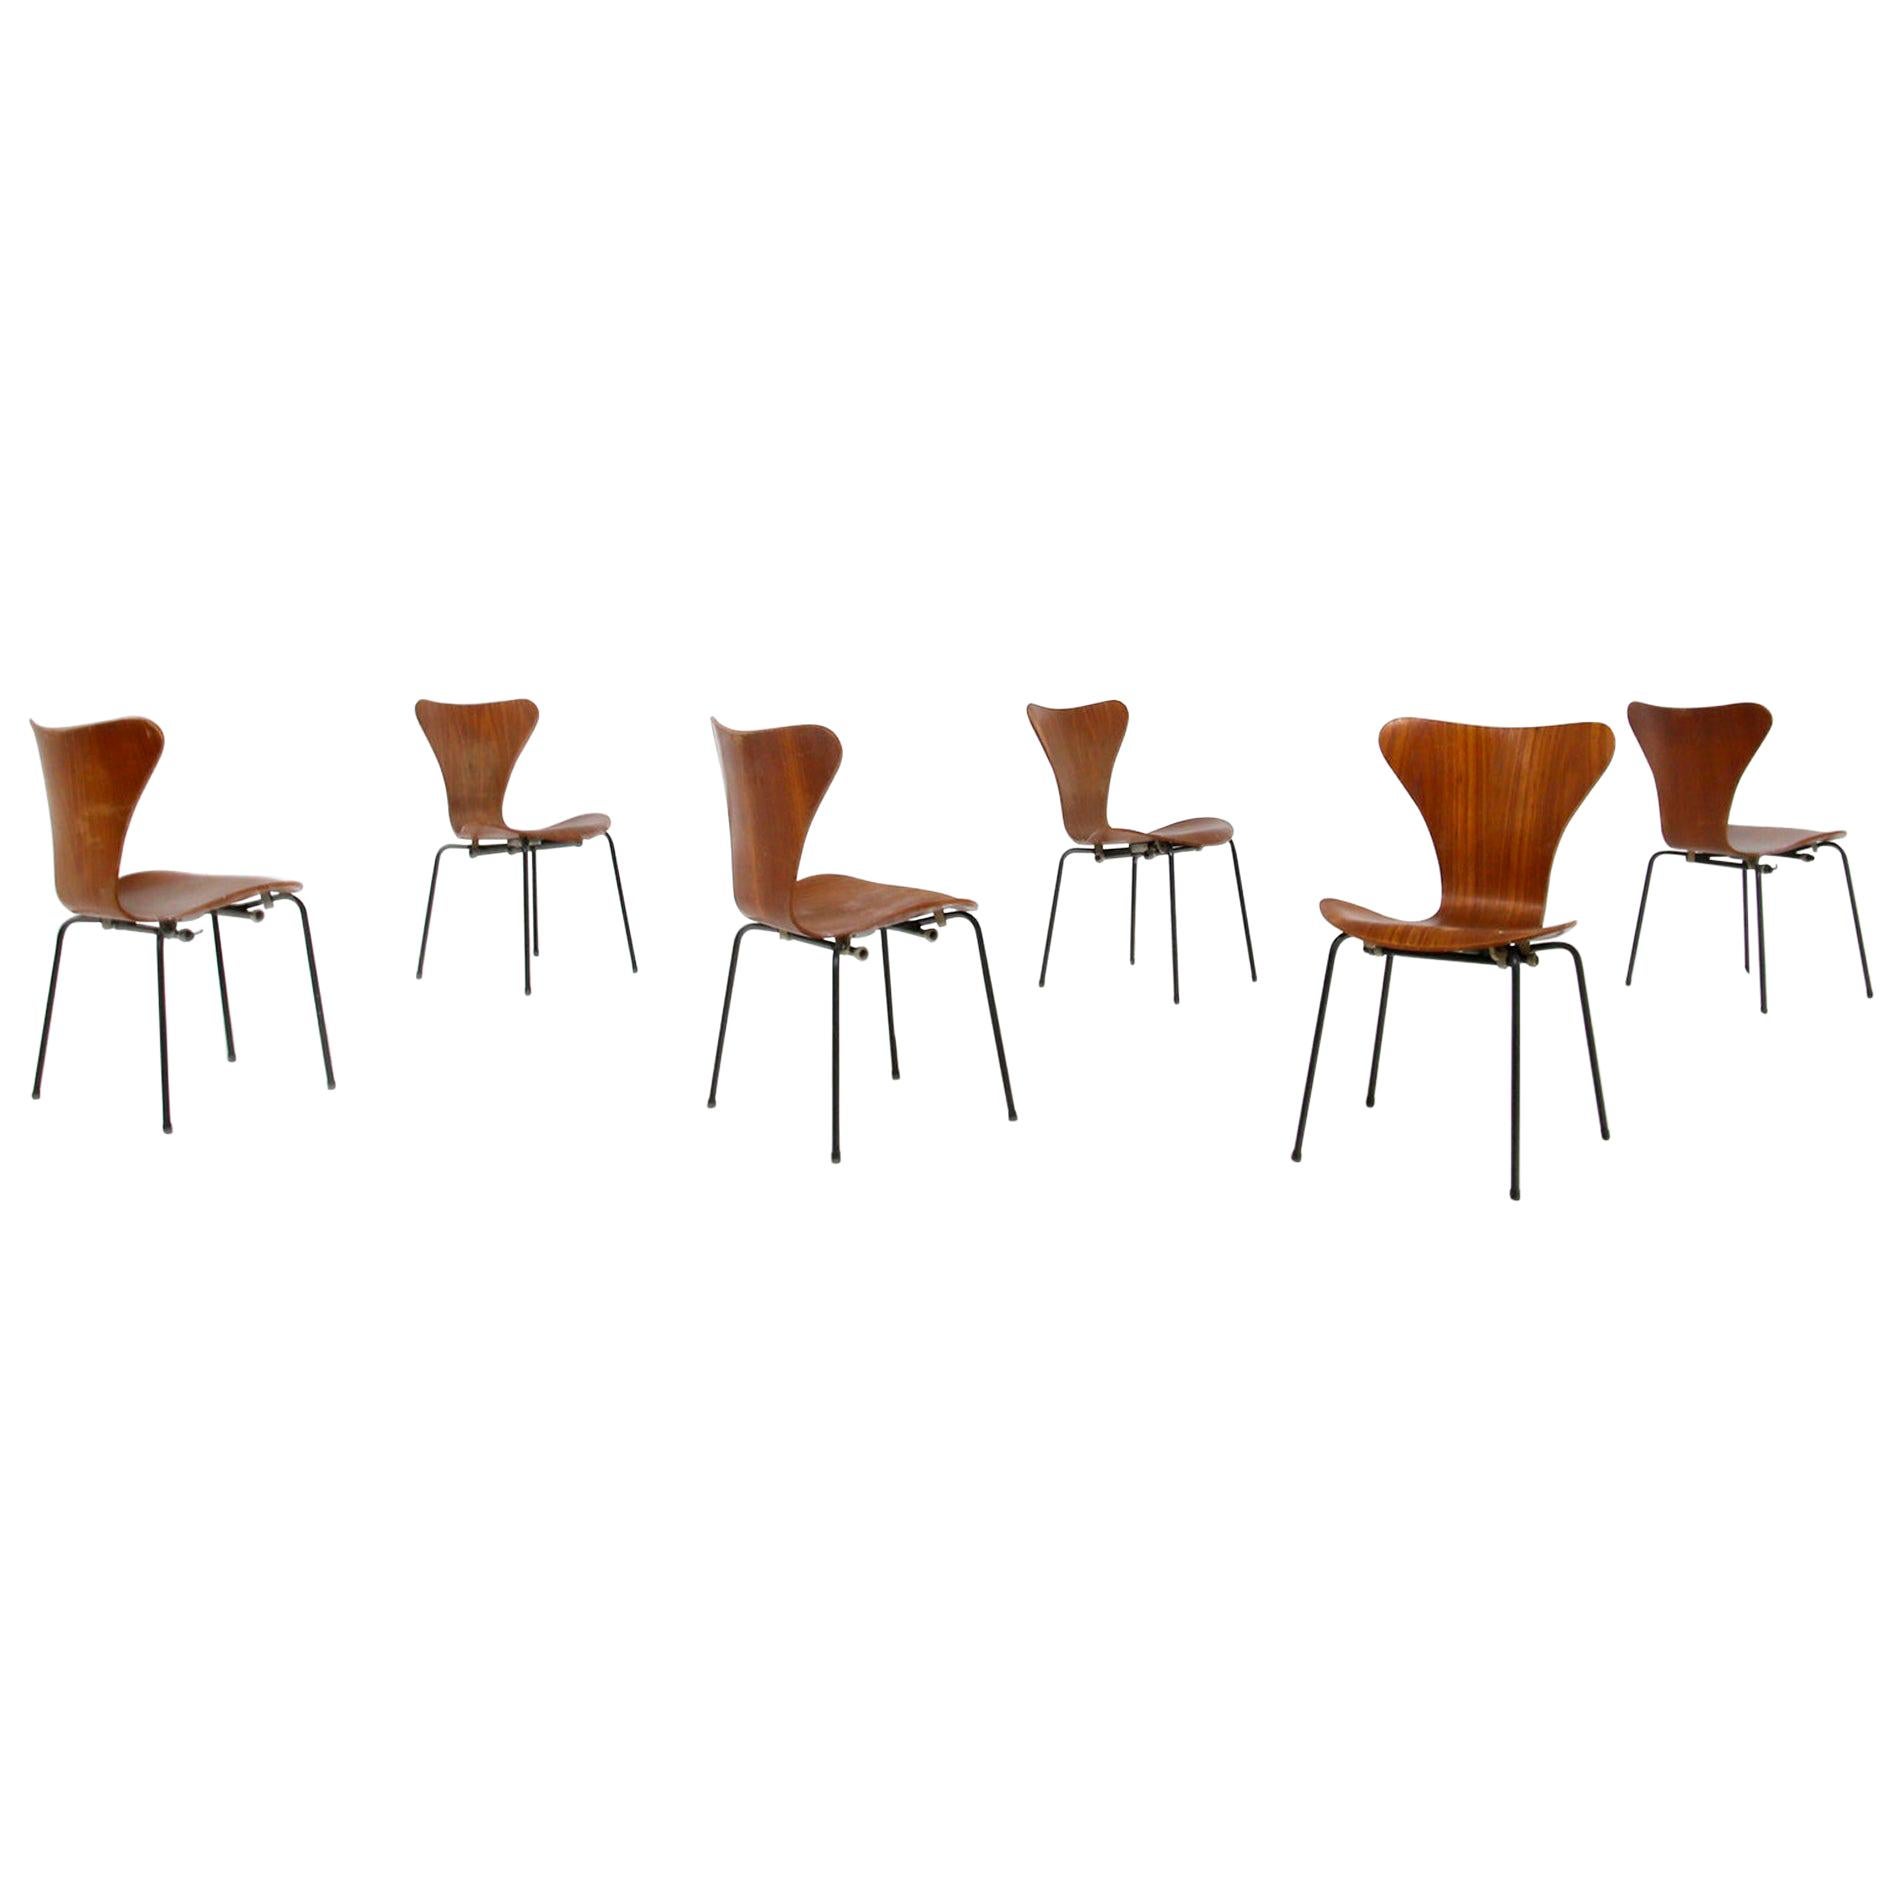 Set of Six Chairs by Arne Jacobsen M. Butterfly for the Brazilian Airline, 1950s For Sale